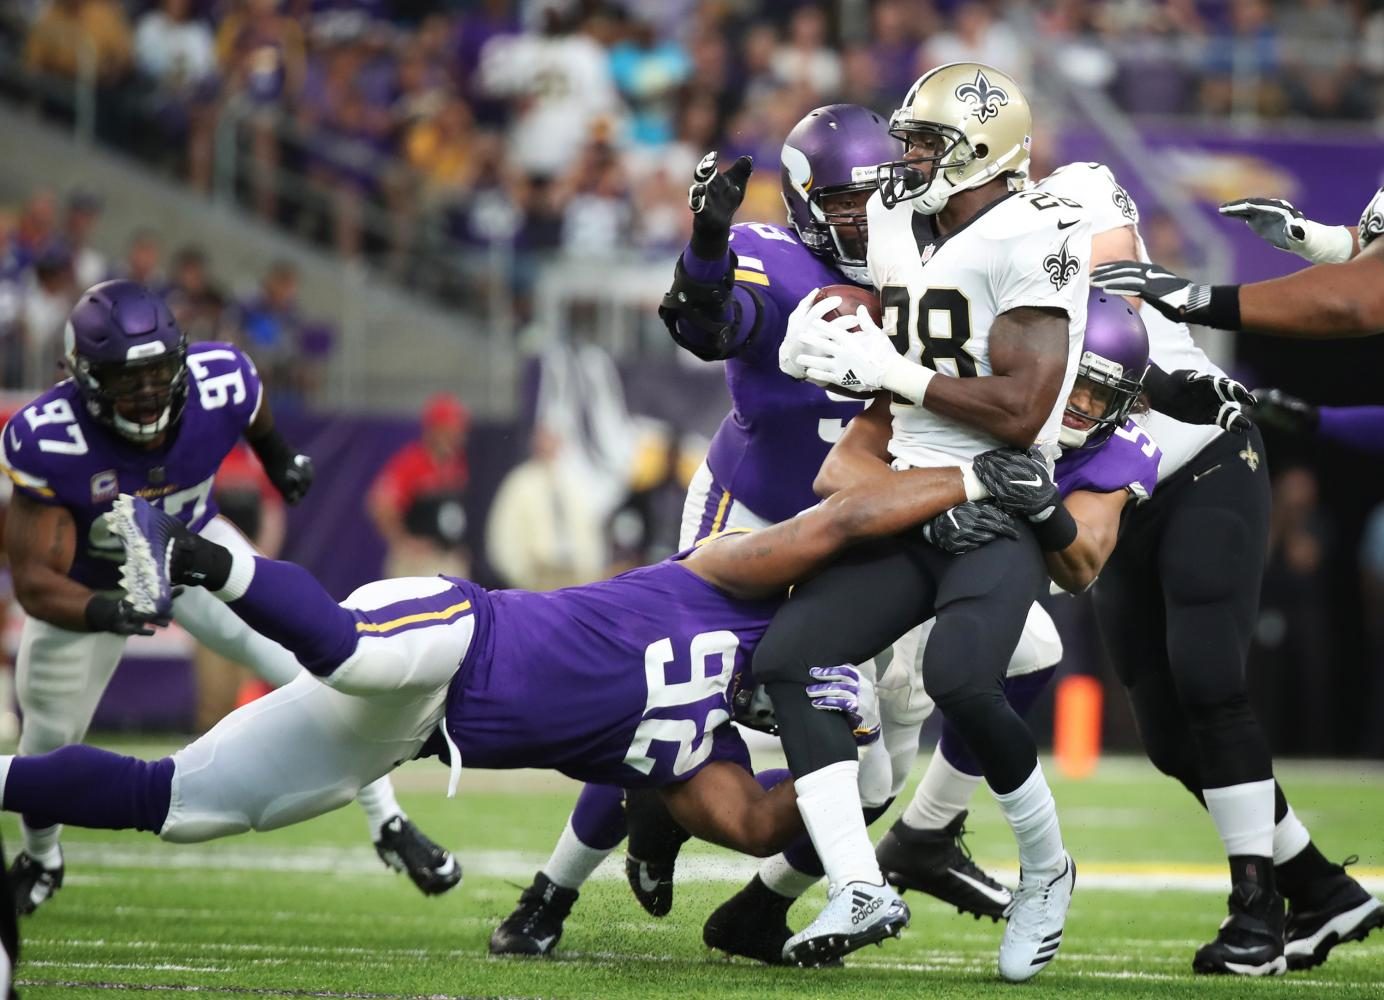 New Orleans Saints running back Adrian Peterson (28) is stopped for no gain by Minnesota Vikings defensive tackle Tom Johnson (92), and middle linebacker Eric Kendricks (54) in the first quarter Monday night, Sept. 11, 2017 at U.S. Bank Stadium in Minneapolis, Minn. The Vikings won, 29-19.